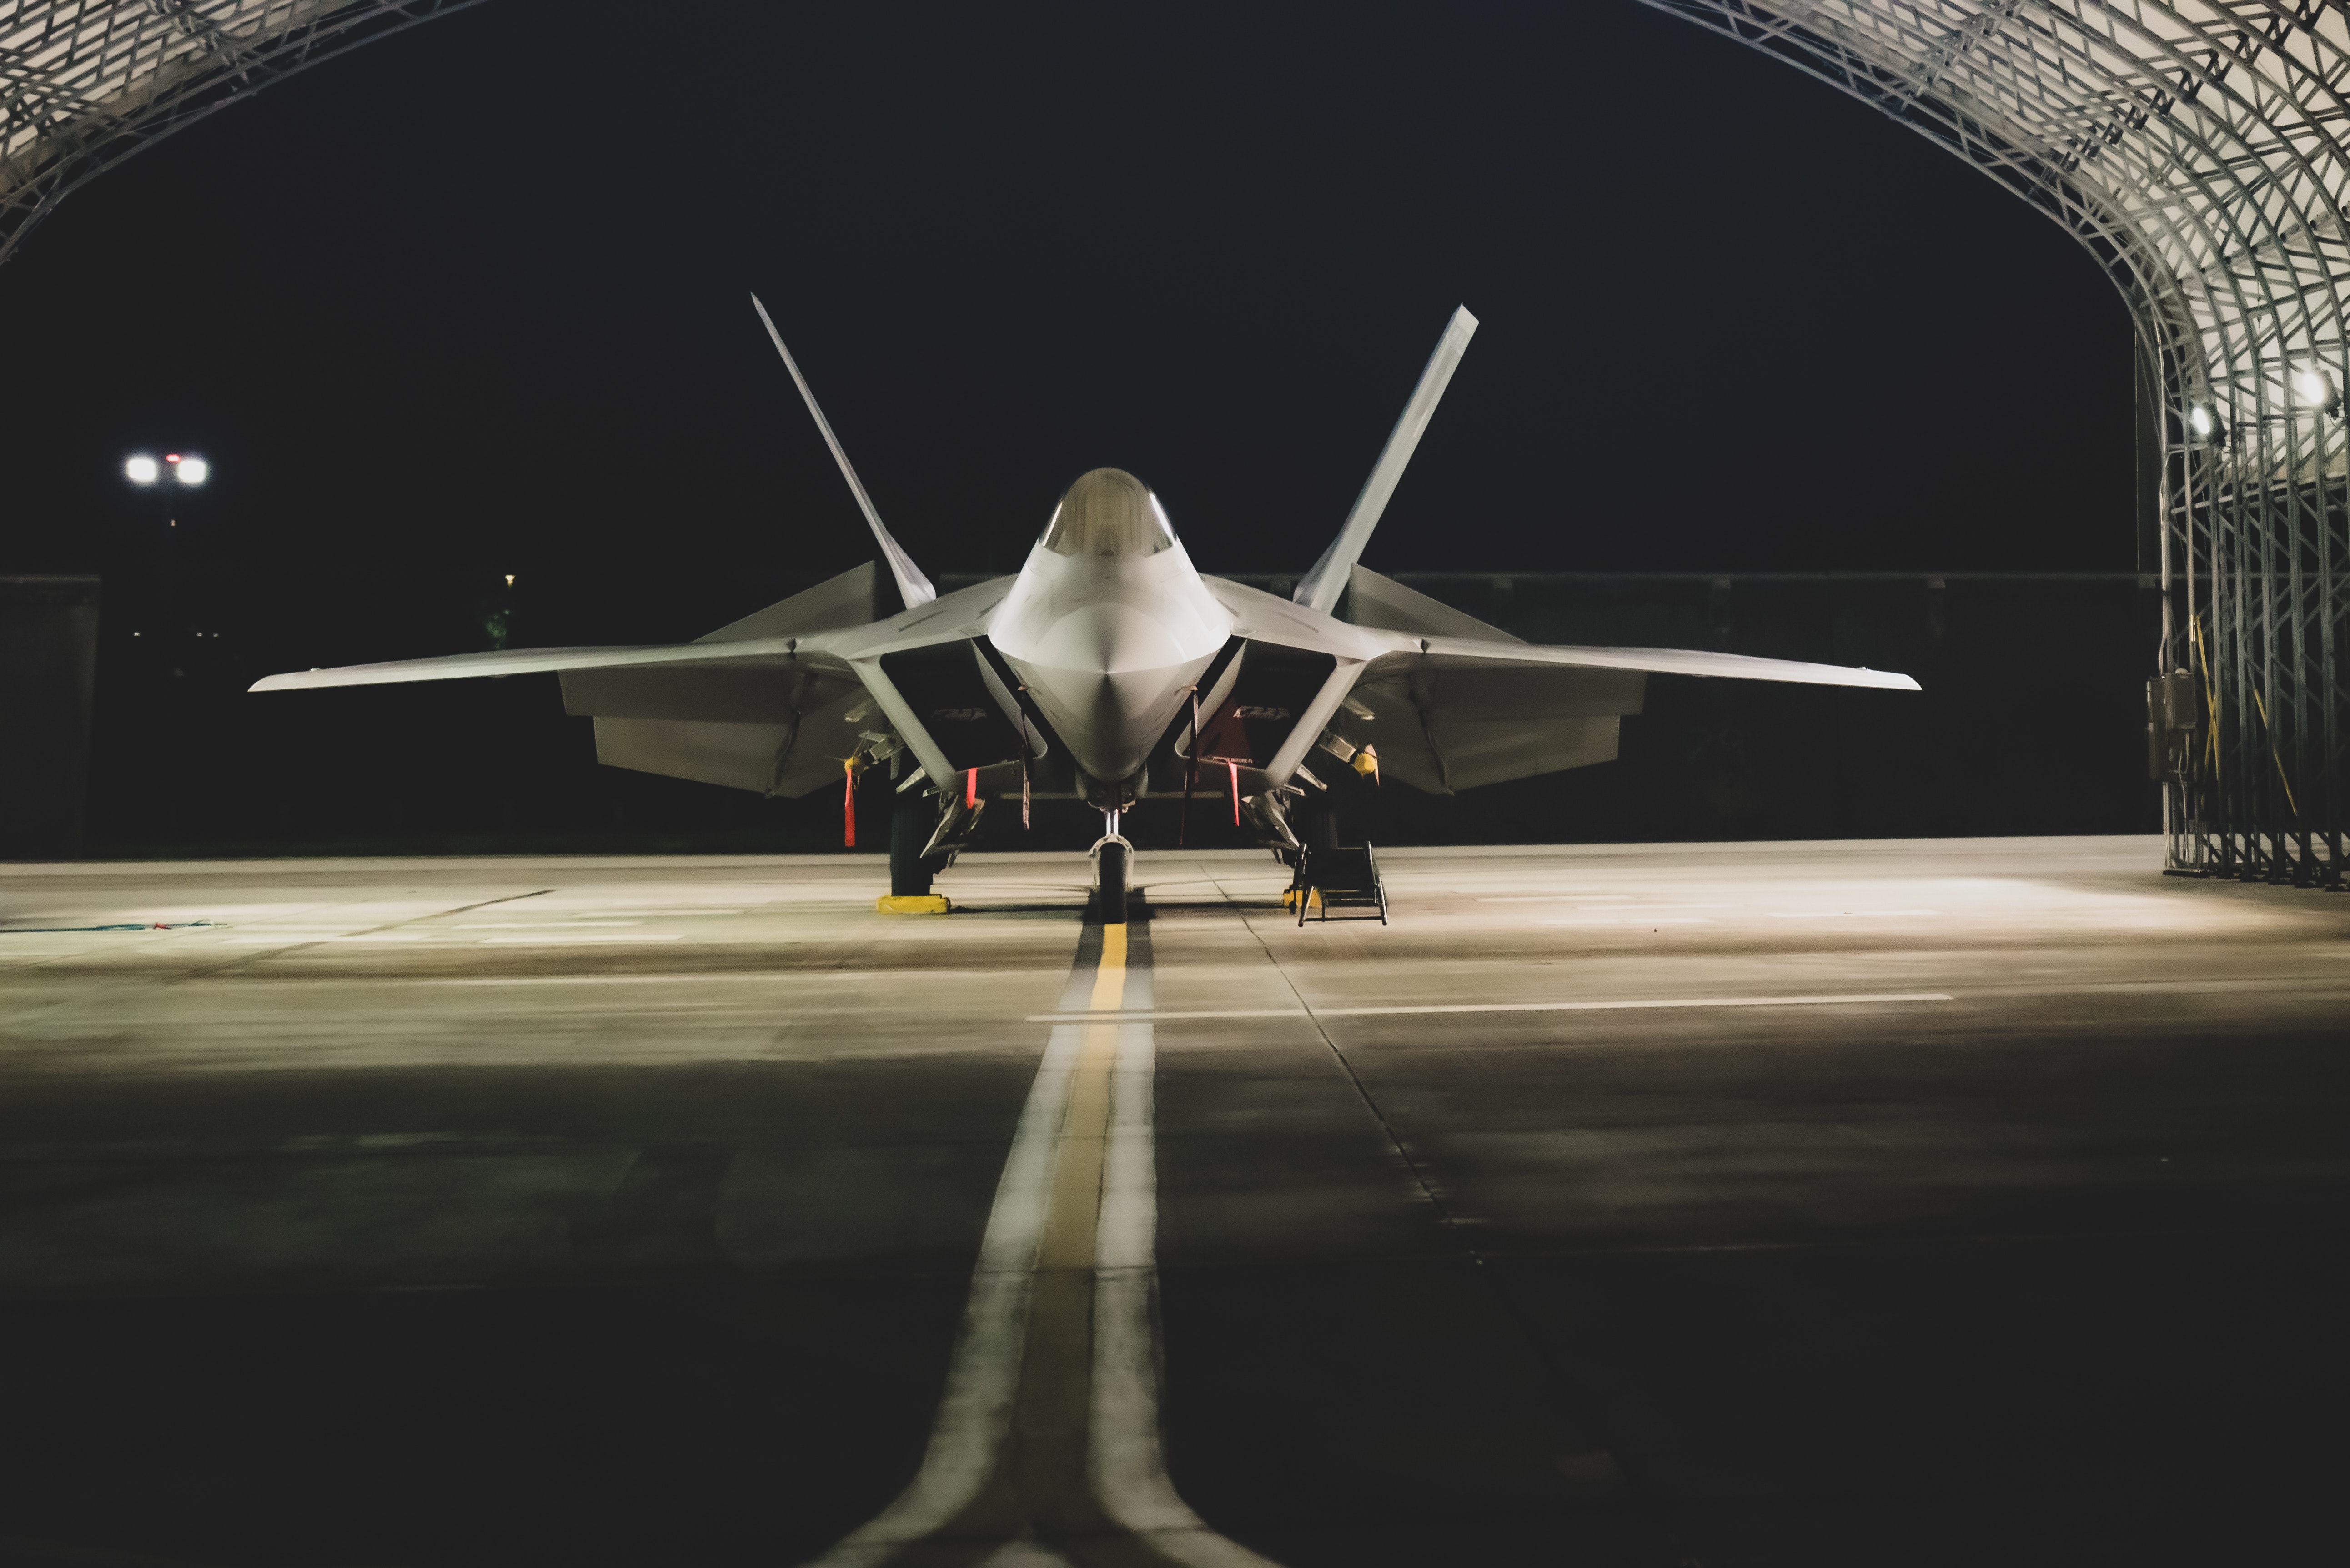 Stealth Aircraft Wallpapers